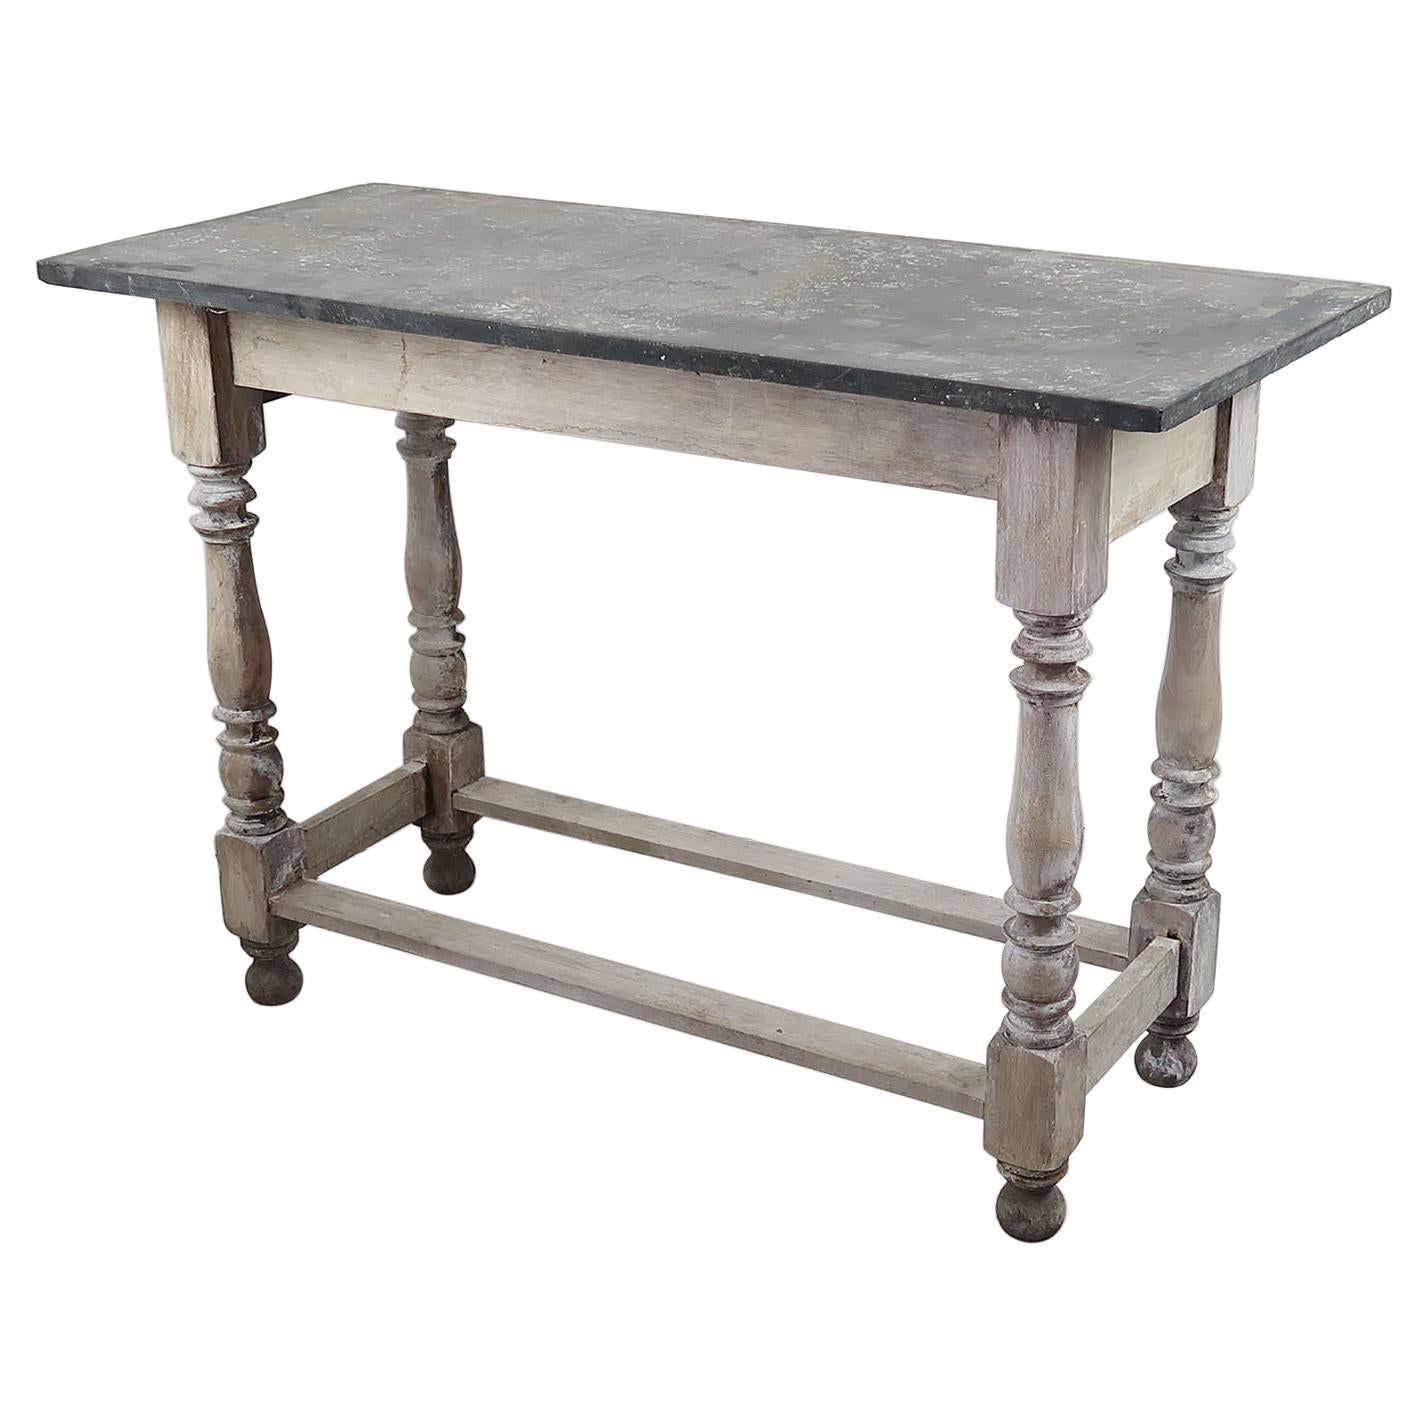 Small Antique Marble Topped Side Table, English, 19th Century